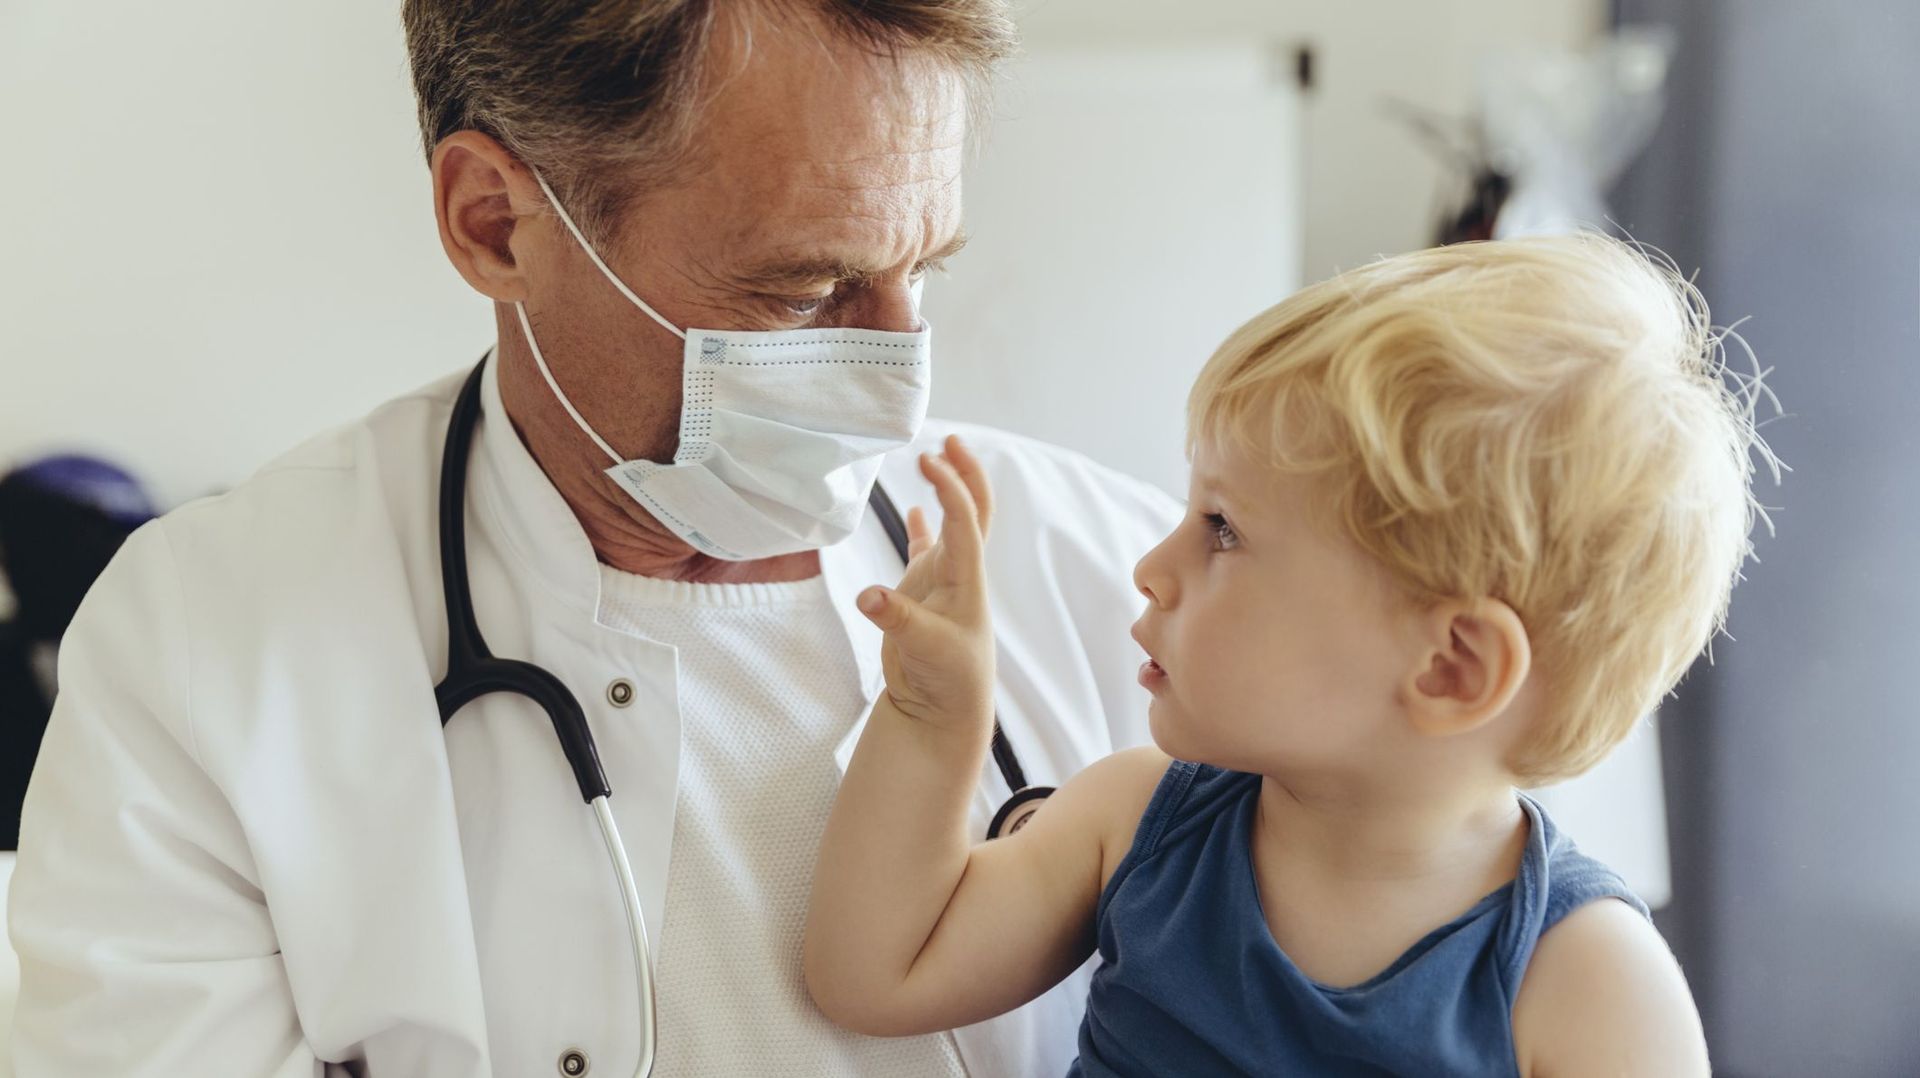 Toddler sitting on lap of pediatrician, wearing protective mask